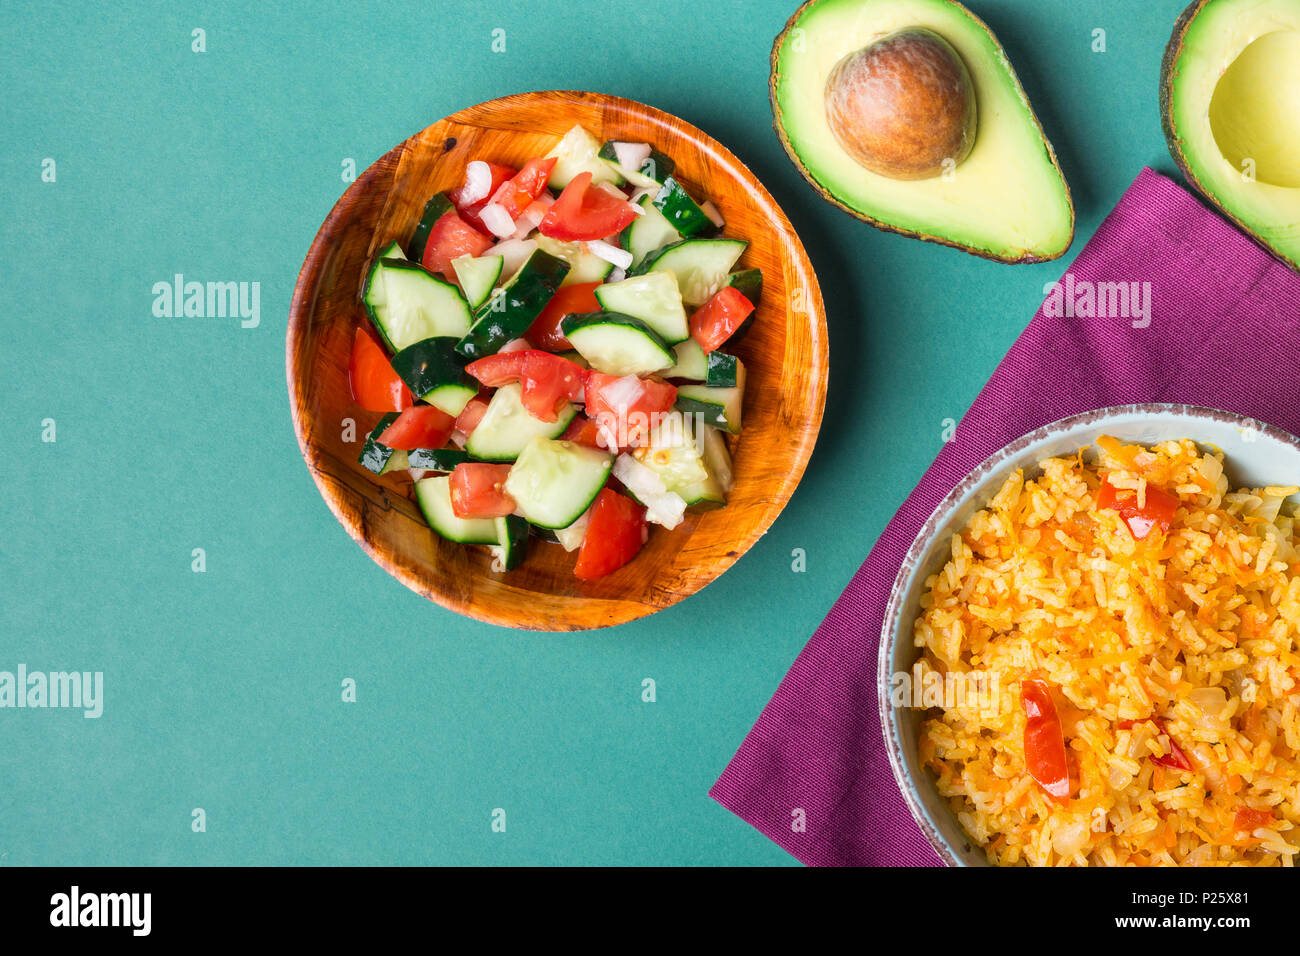 Traditional National Mexican Tomato Rice Stewed Pilaf with Hot Chili Peppers Garlic in Turquoise Bowl. Fresh Cucumber Onion Salsa Salad Avocado for Gu Stock Photo